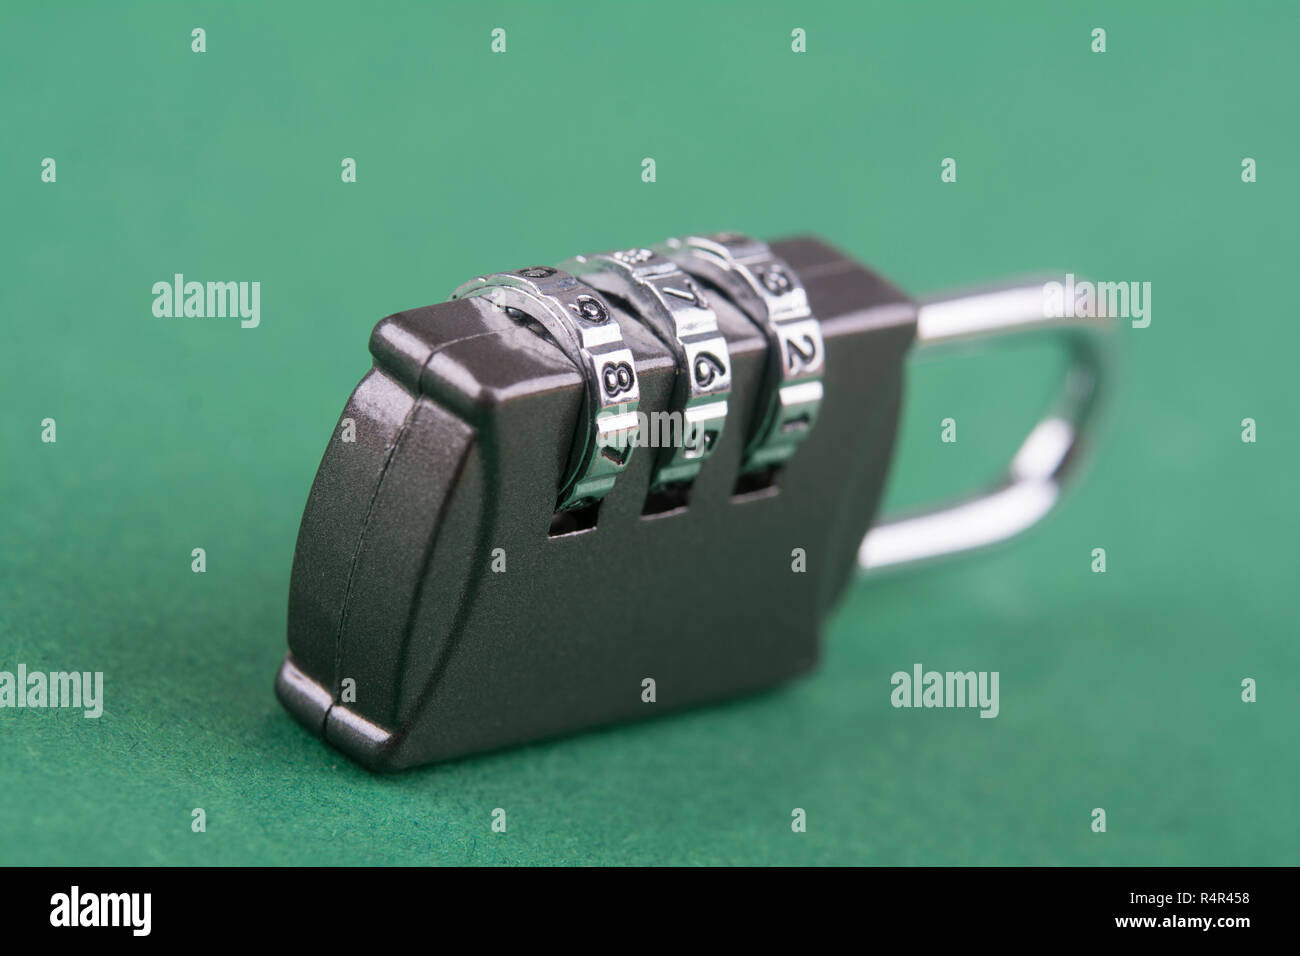 combination lock as a symbol photo for security Stock Photo